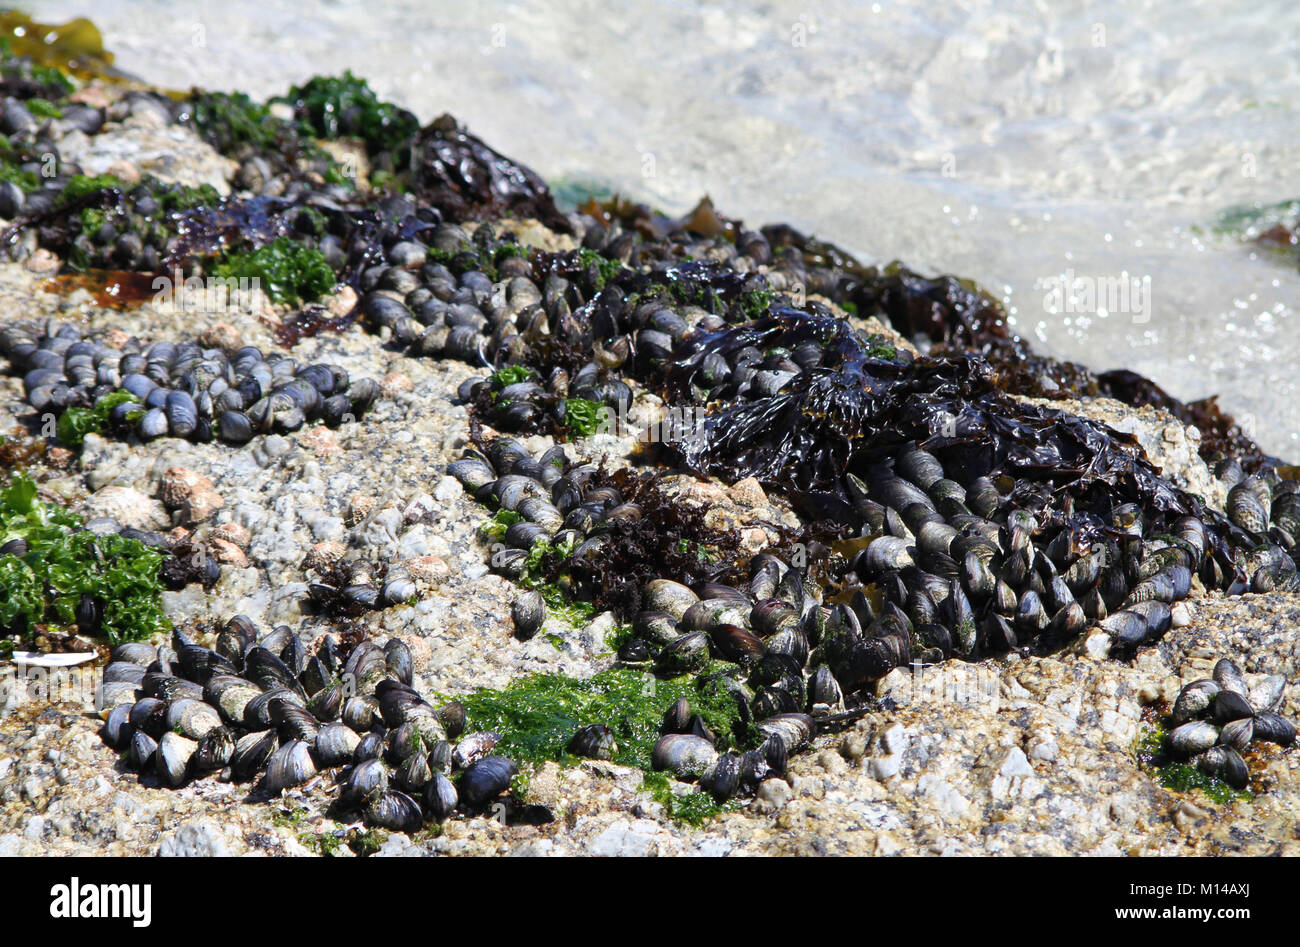 Black mussels on beach with seaweed and kelp (Choromytilus meridionalis), Clifton Beach, Cape Town, Western Cape, South Africa. Stock Photo